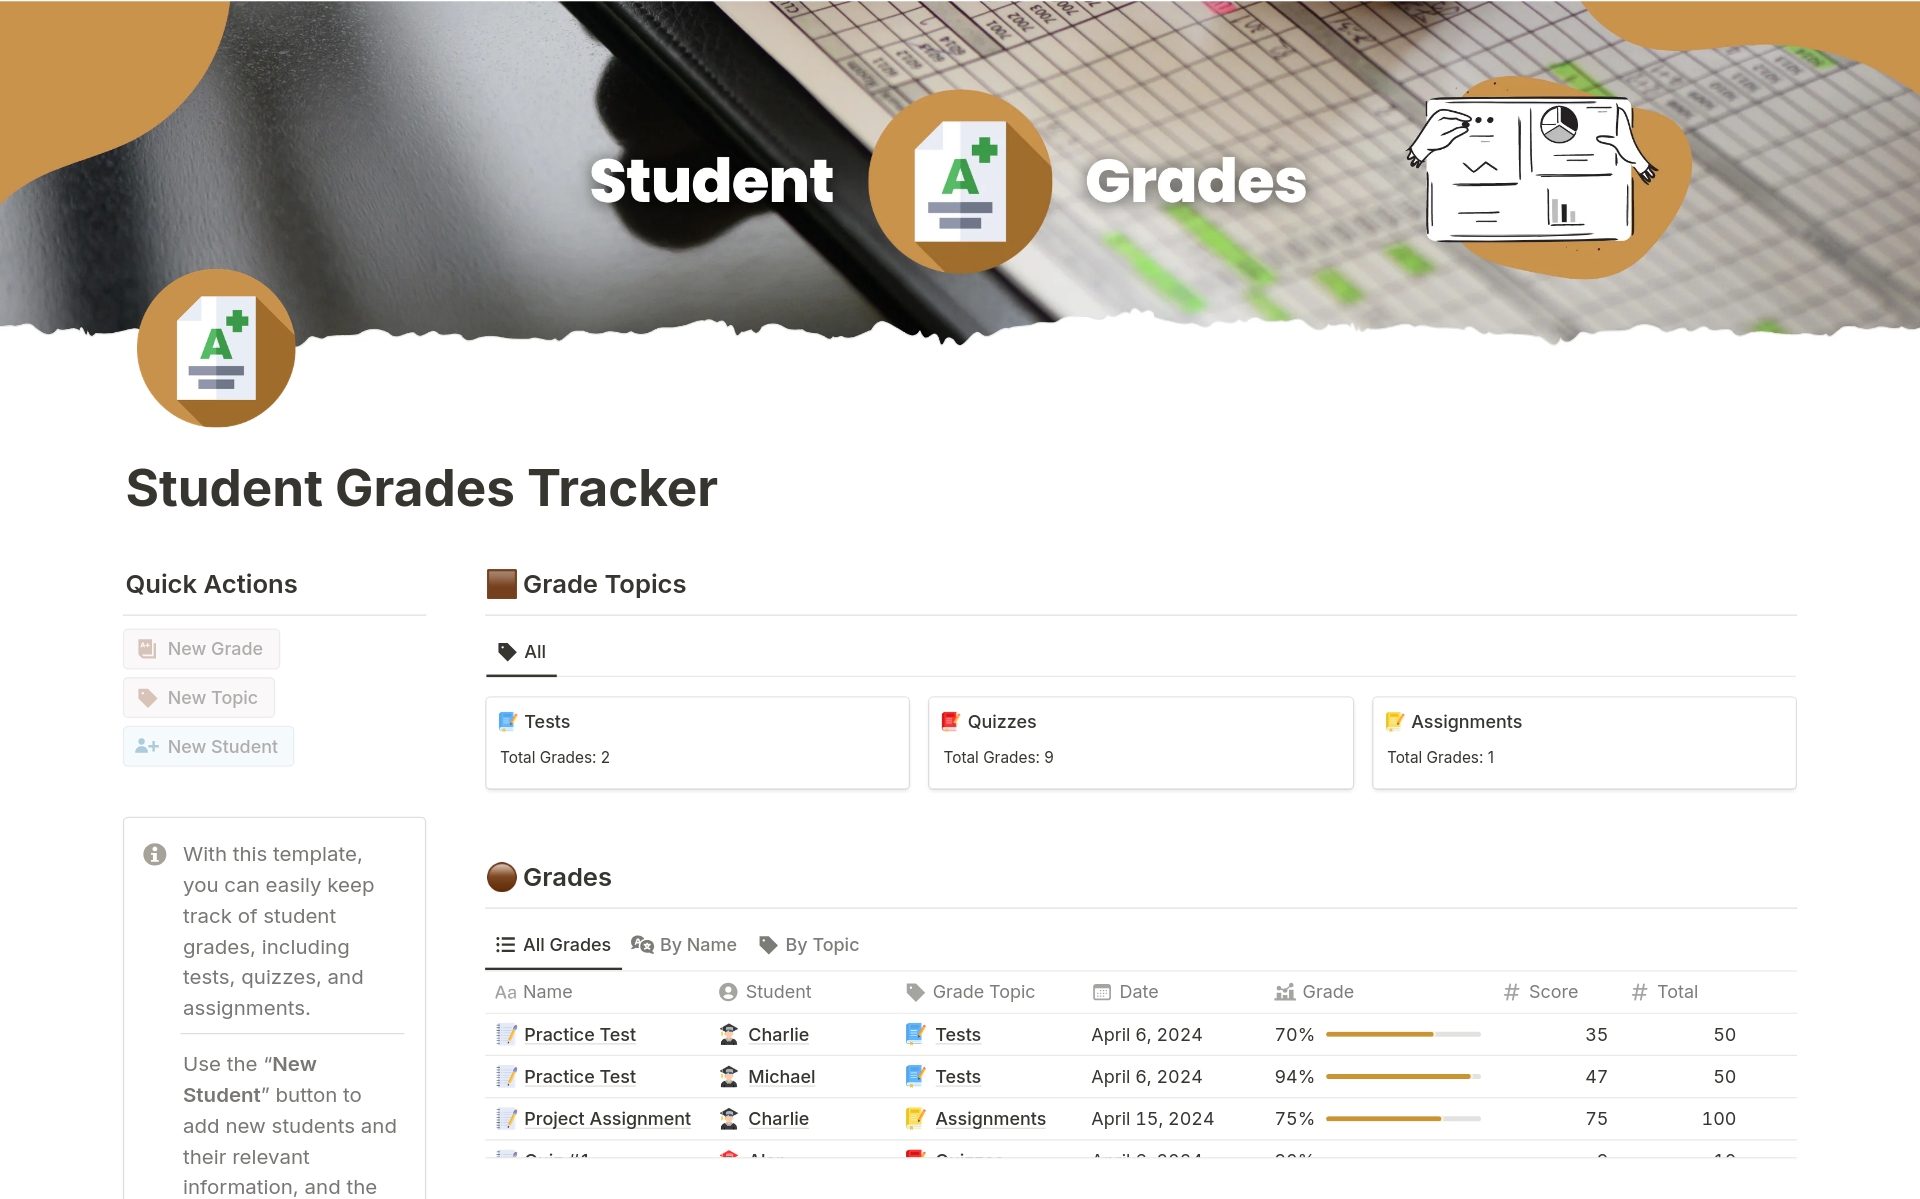 The Notion Student Grades Tracker is an intuitive template that simplifies grading and tracking student performance for educators and teachers.